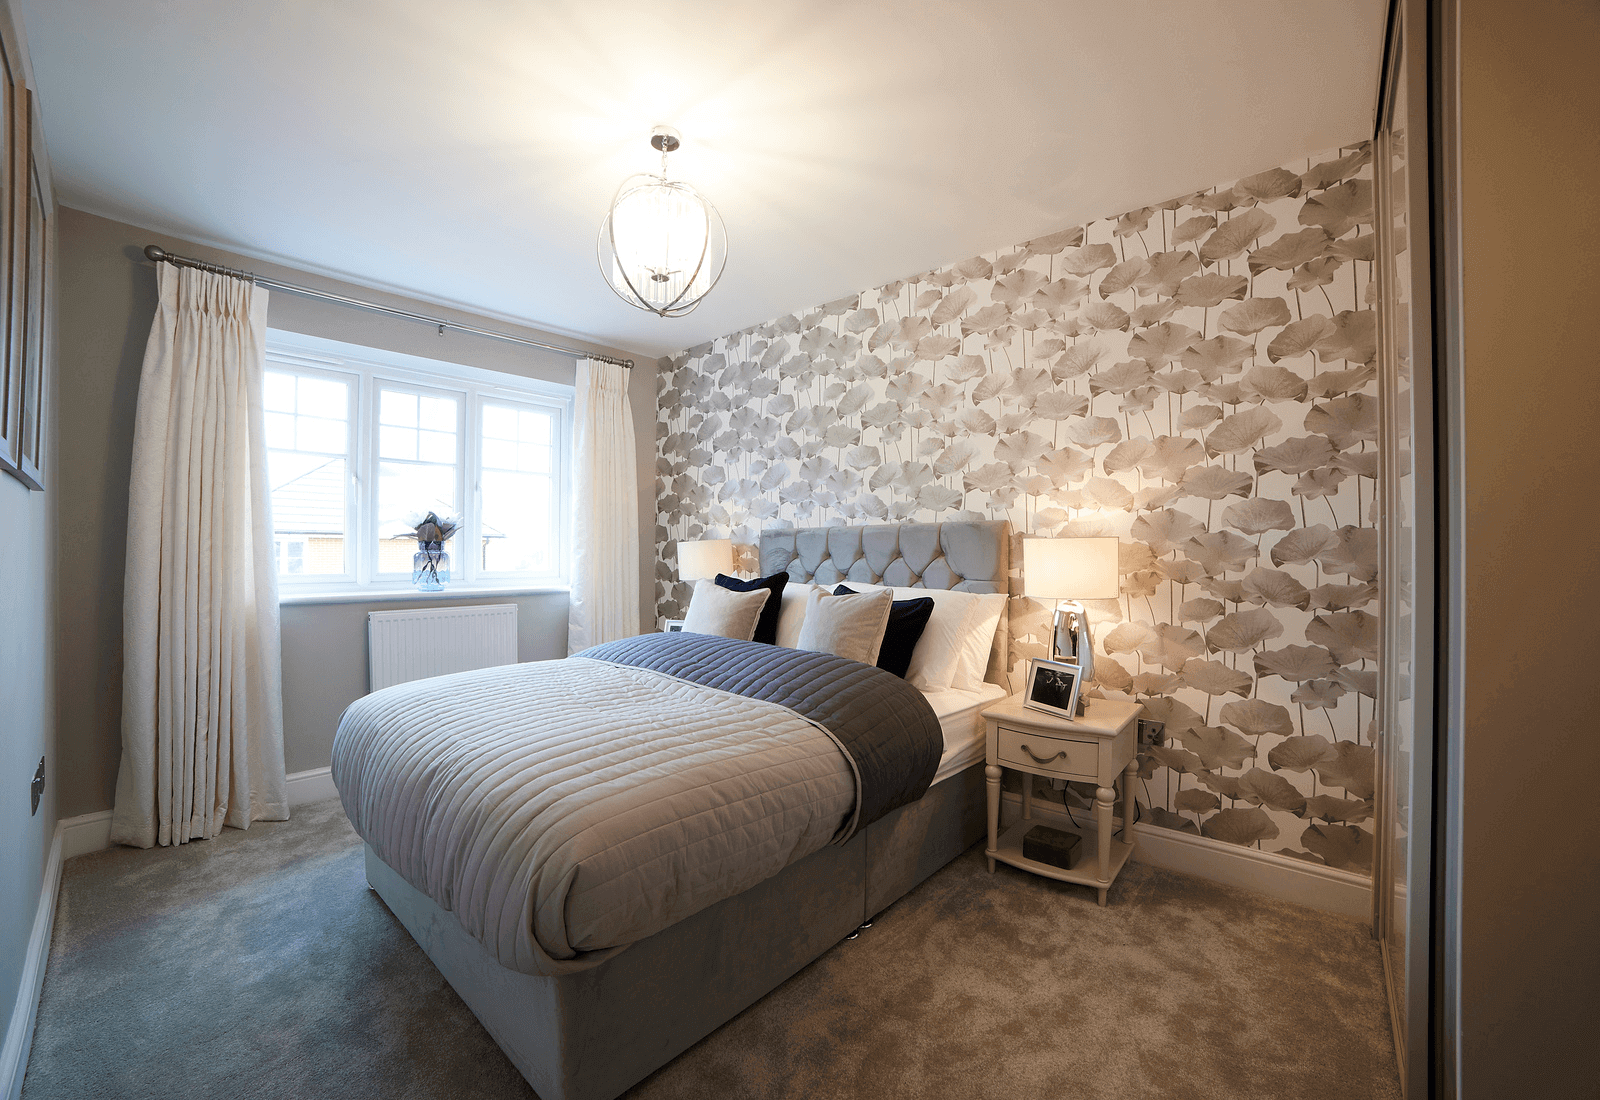 Bedroom 2 in the Bayswater Show Home at St Peter's Park